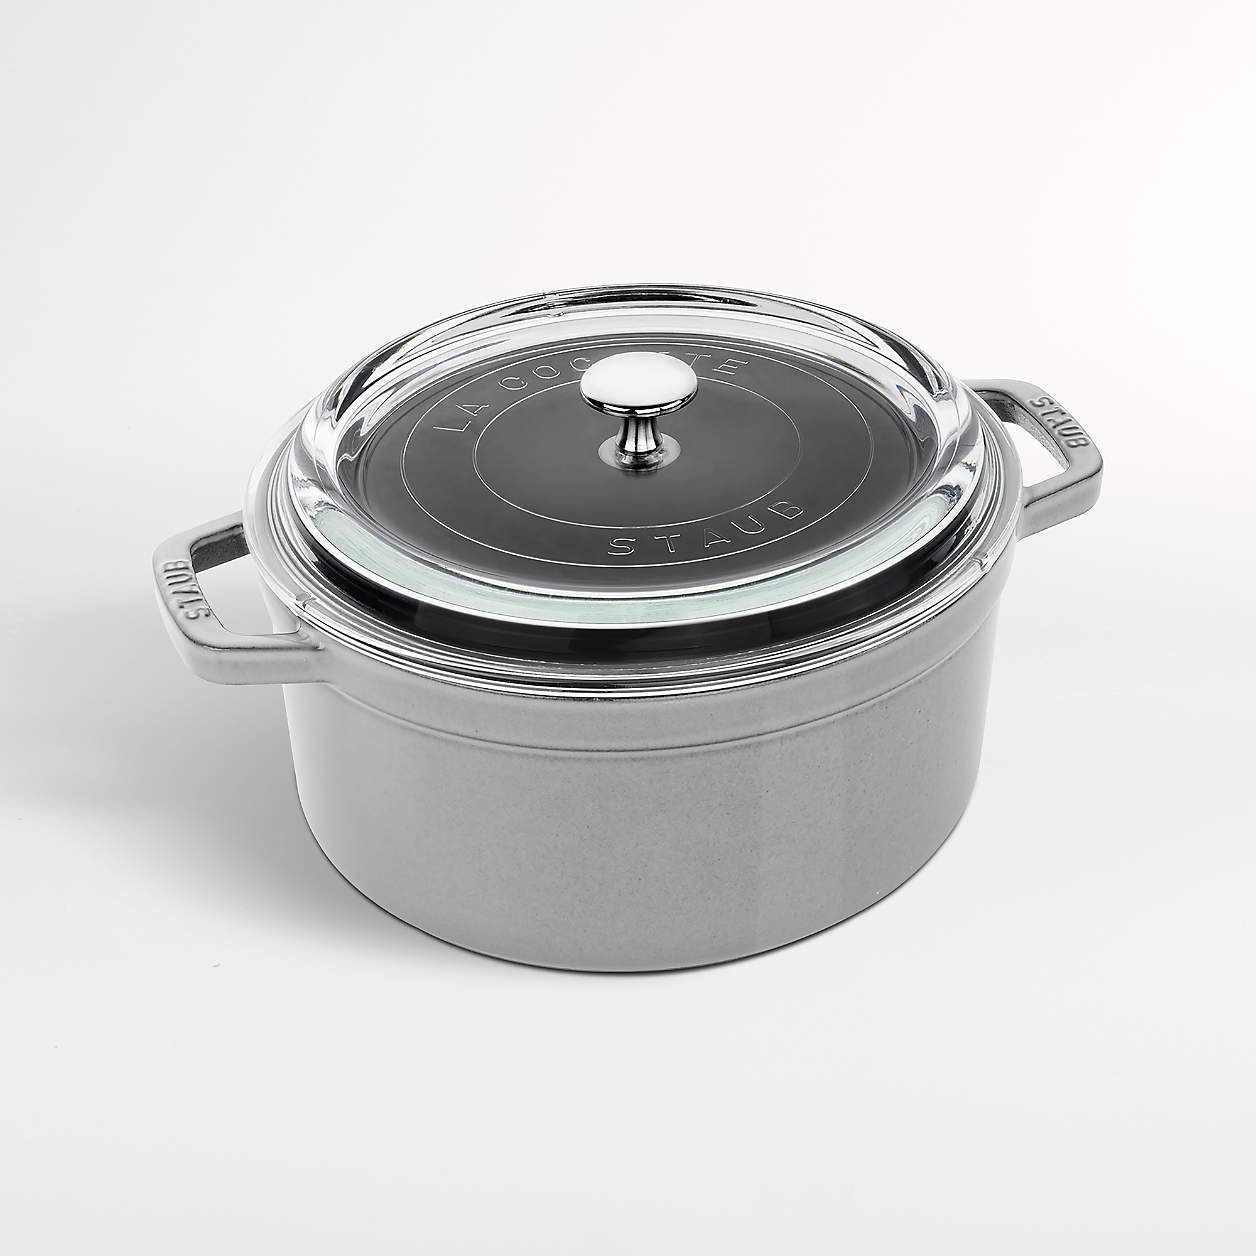 Staub 4-Quart Round Graphite Cocotte with Glass Lid + Reviews | Crate ...